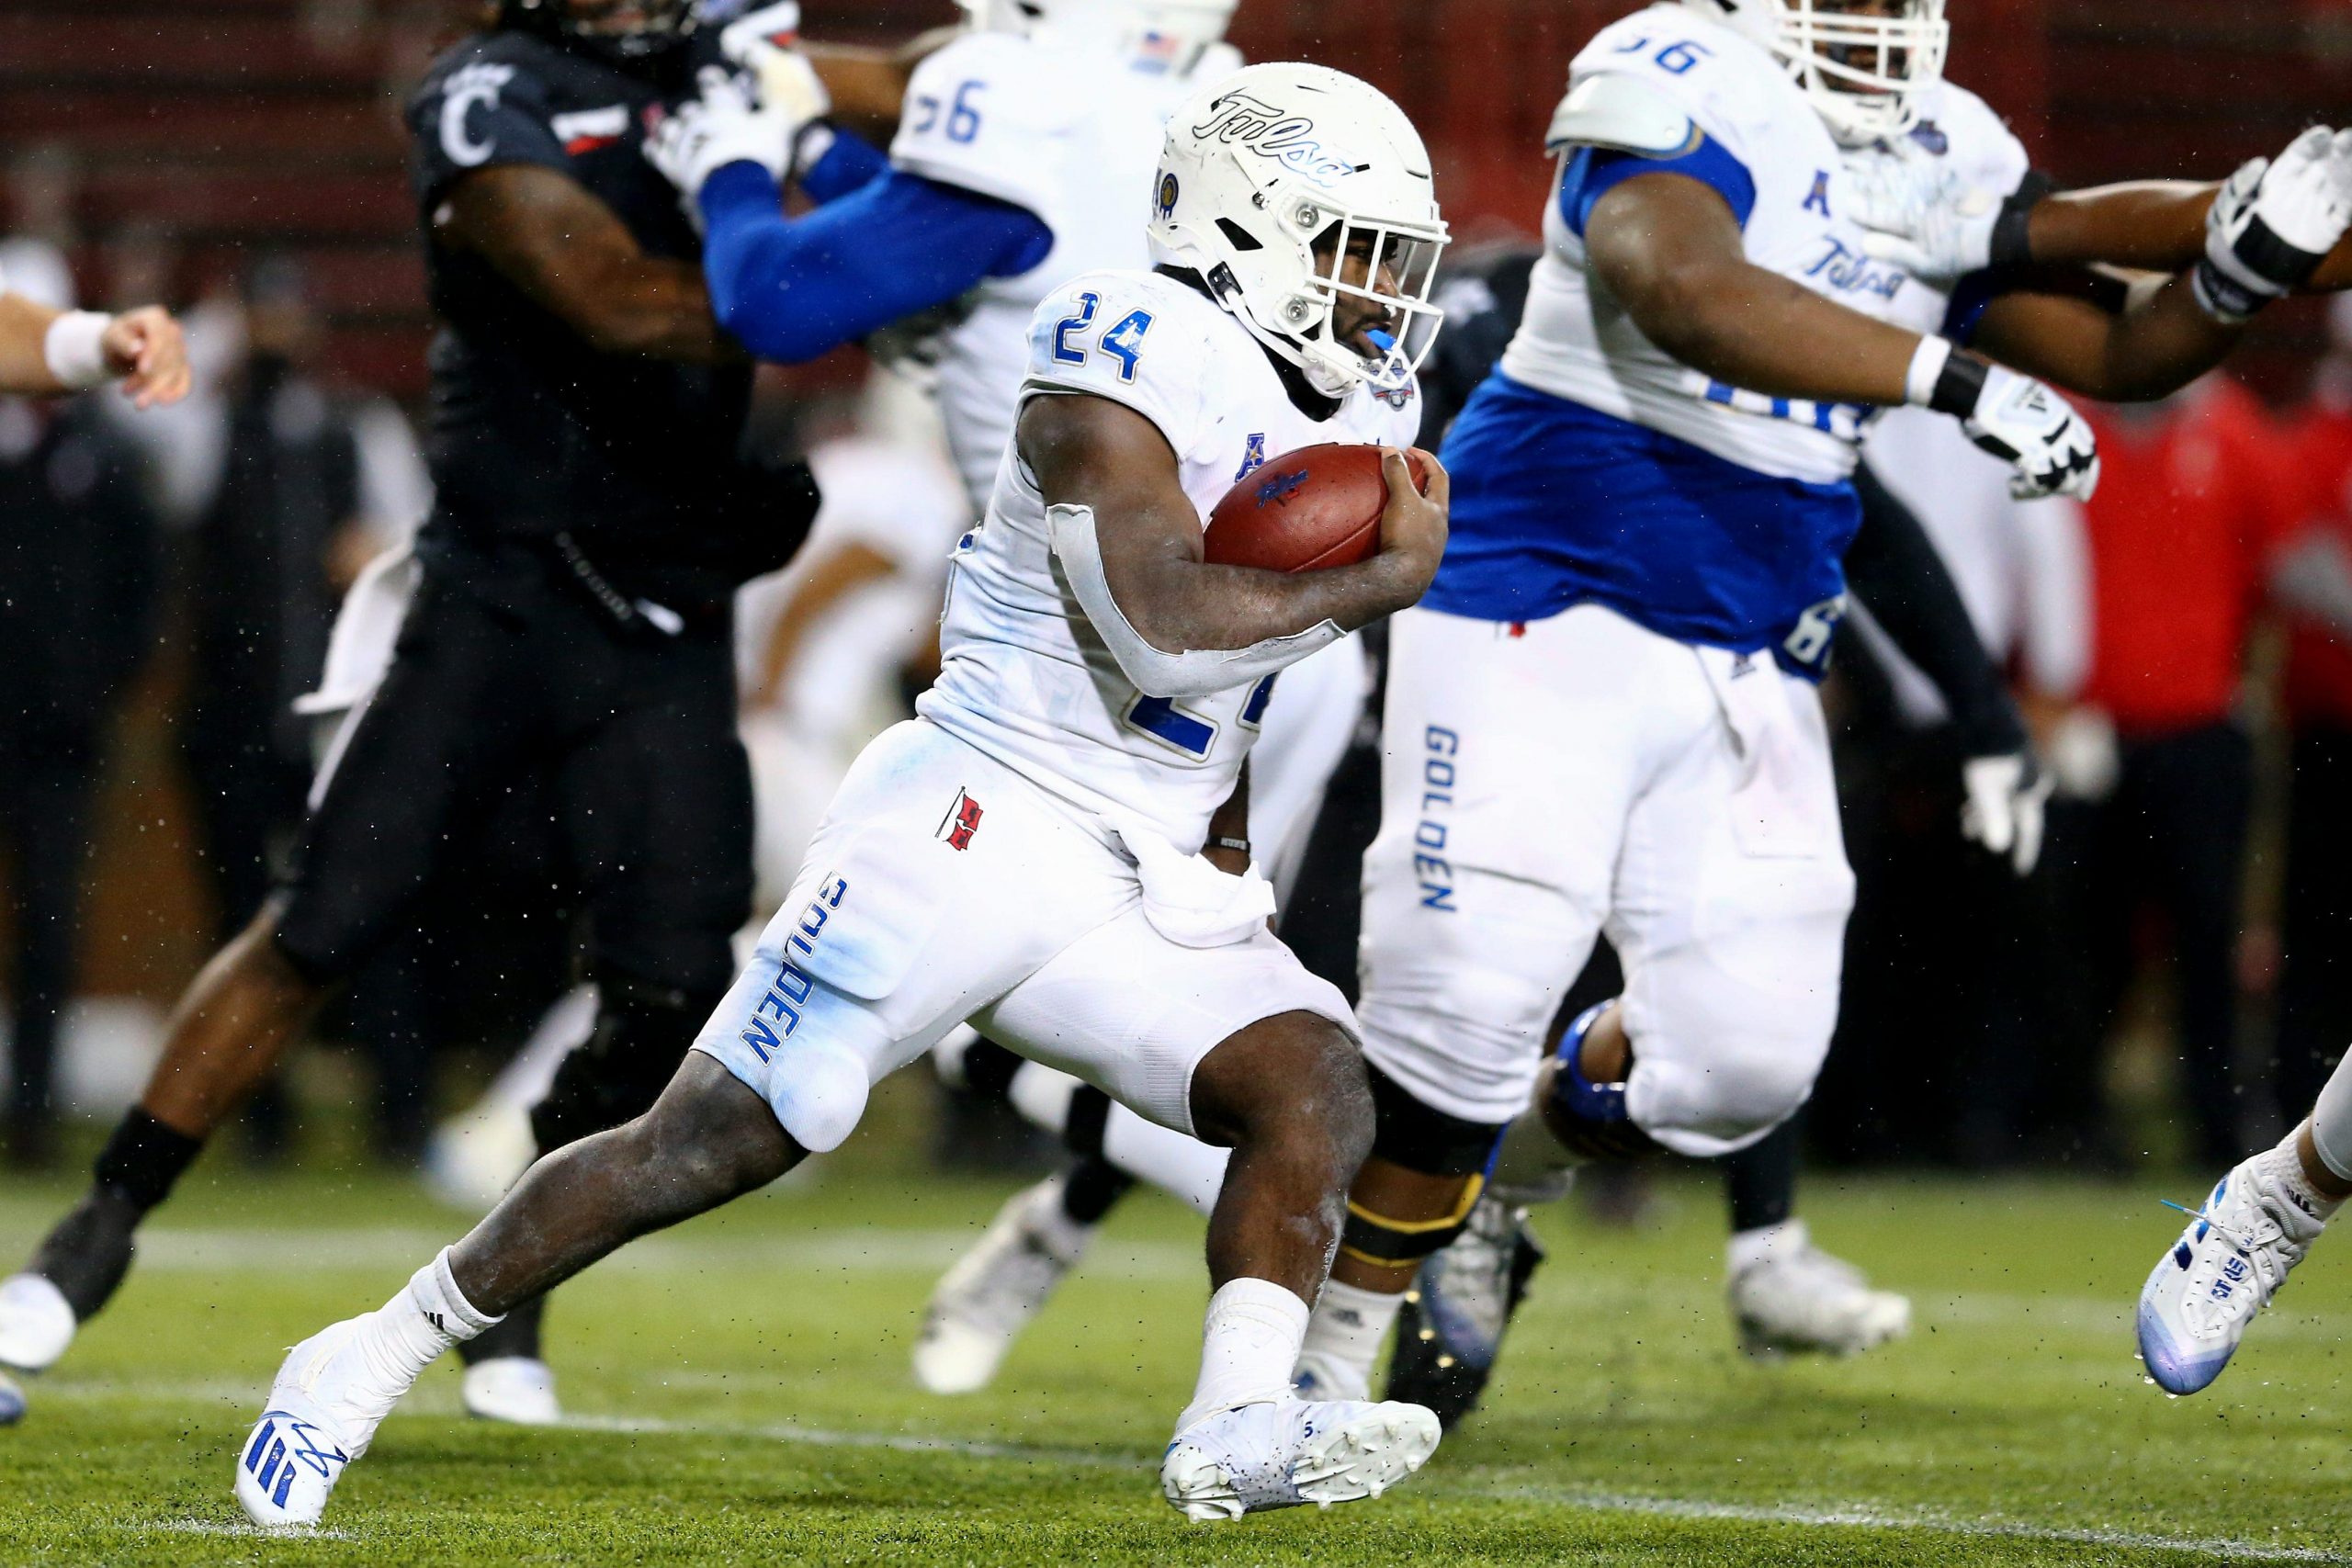 Tulsa Golden Hurricane running back Corey Taylor II carries the ball during AAC Championship Game